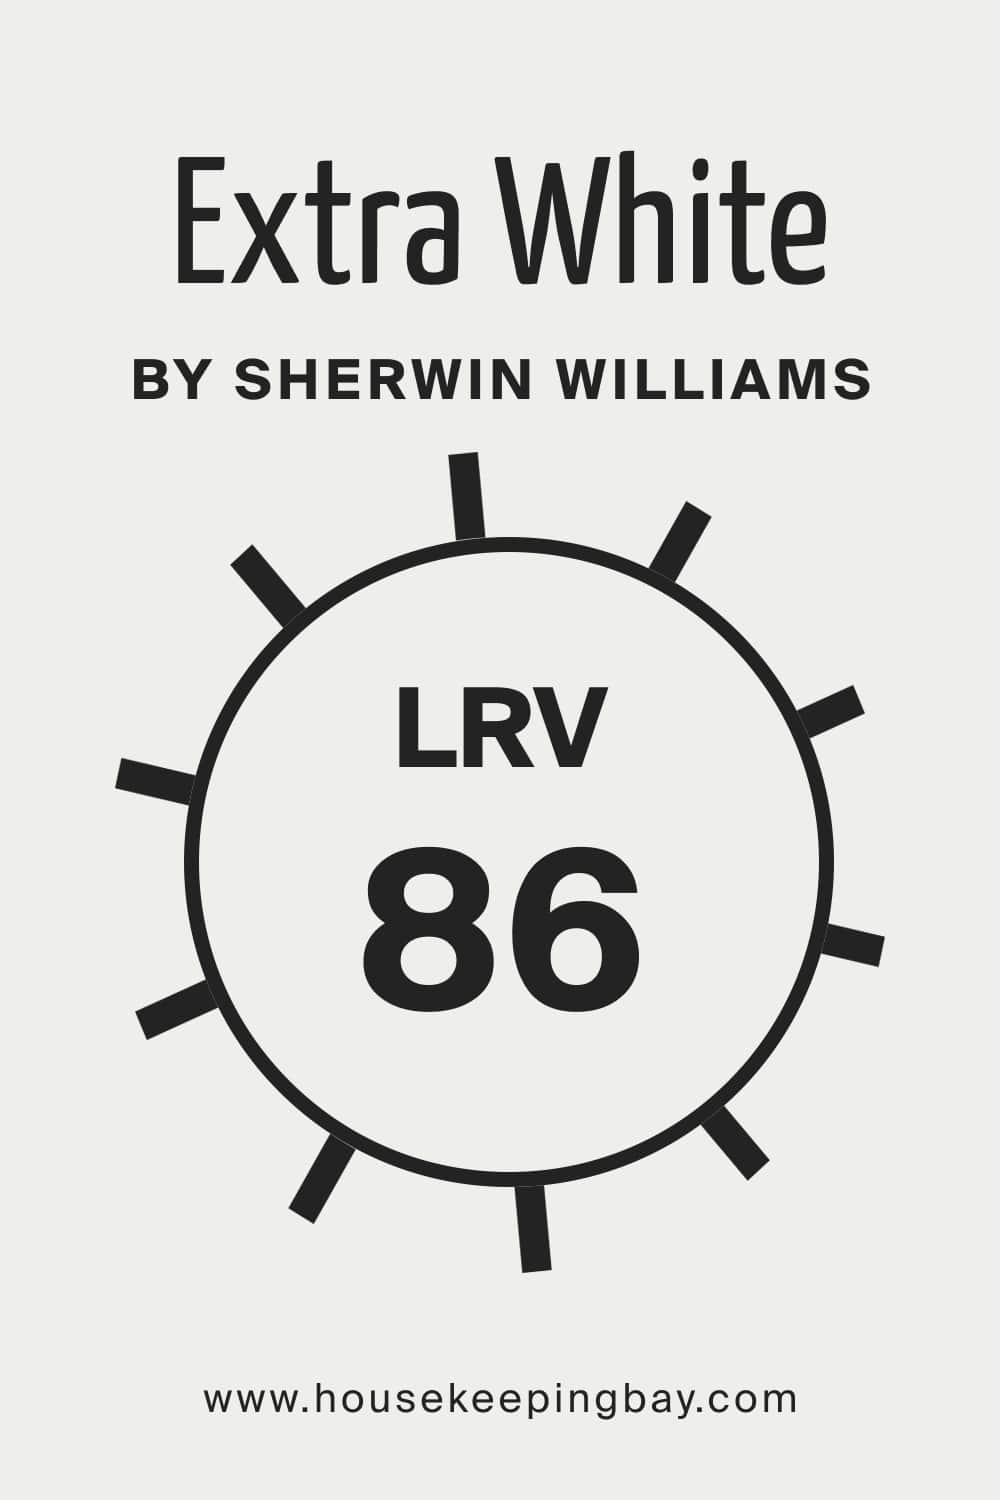 Extra White SW 7006 by Sherwin Williams. LRV – 86